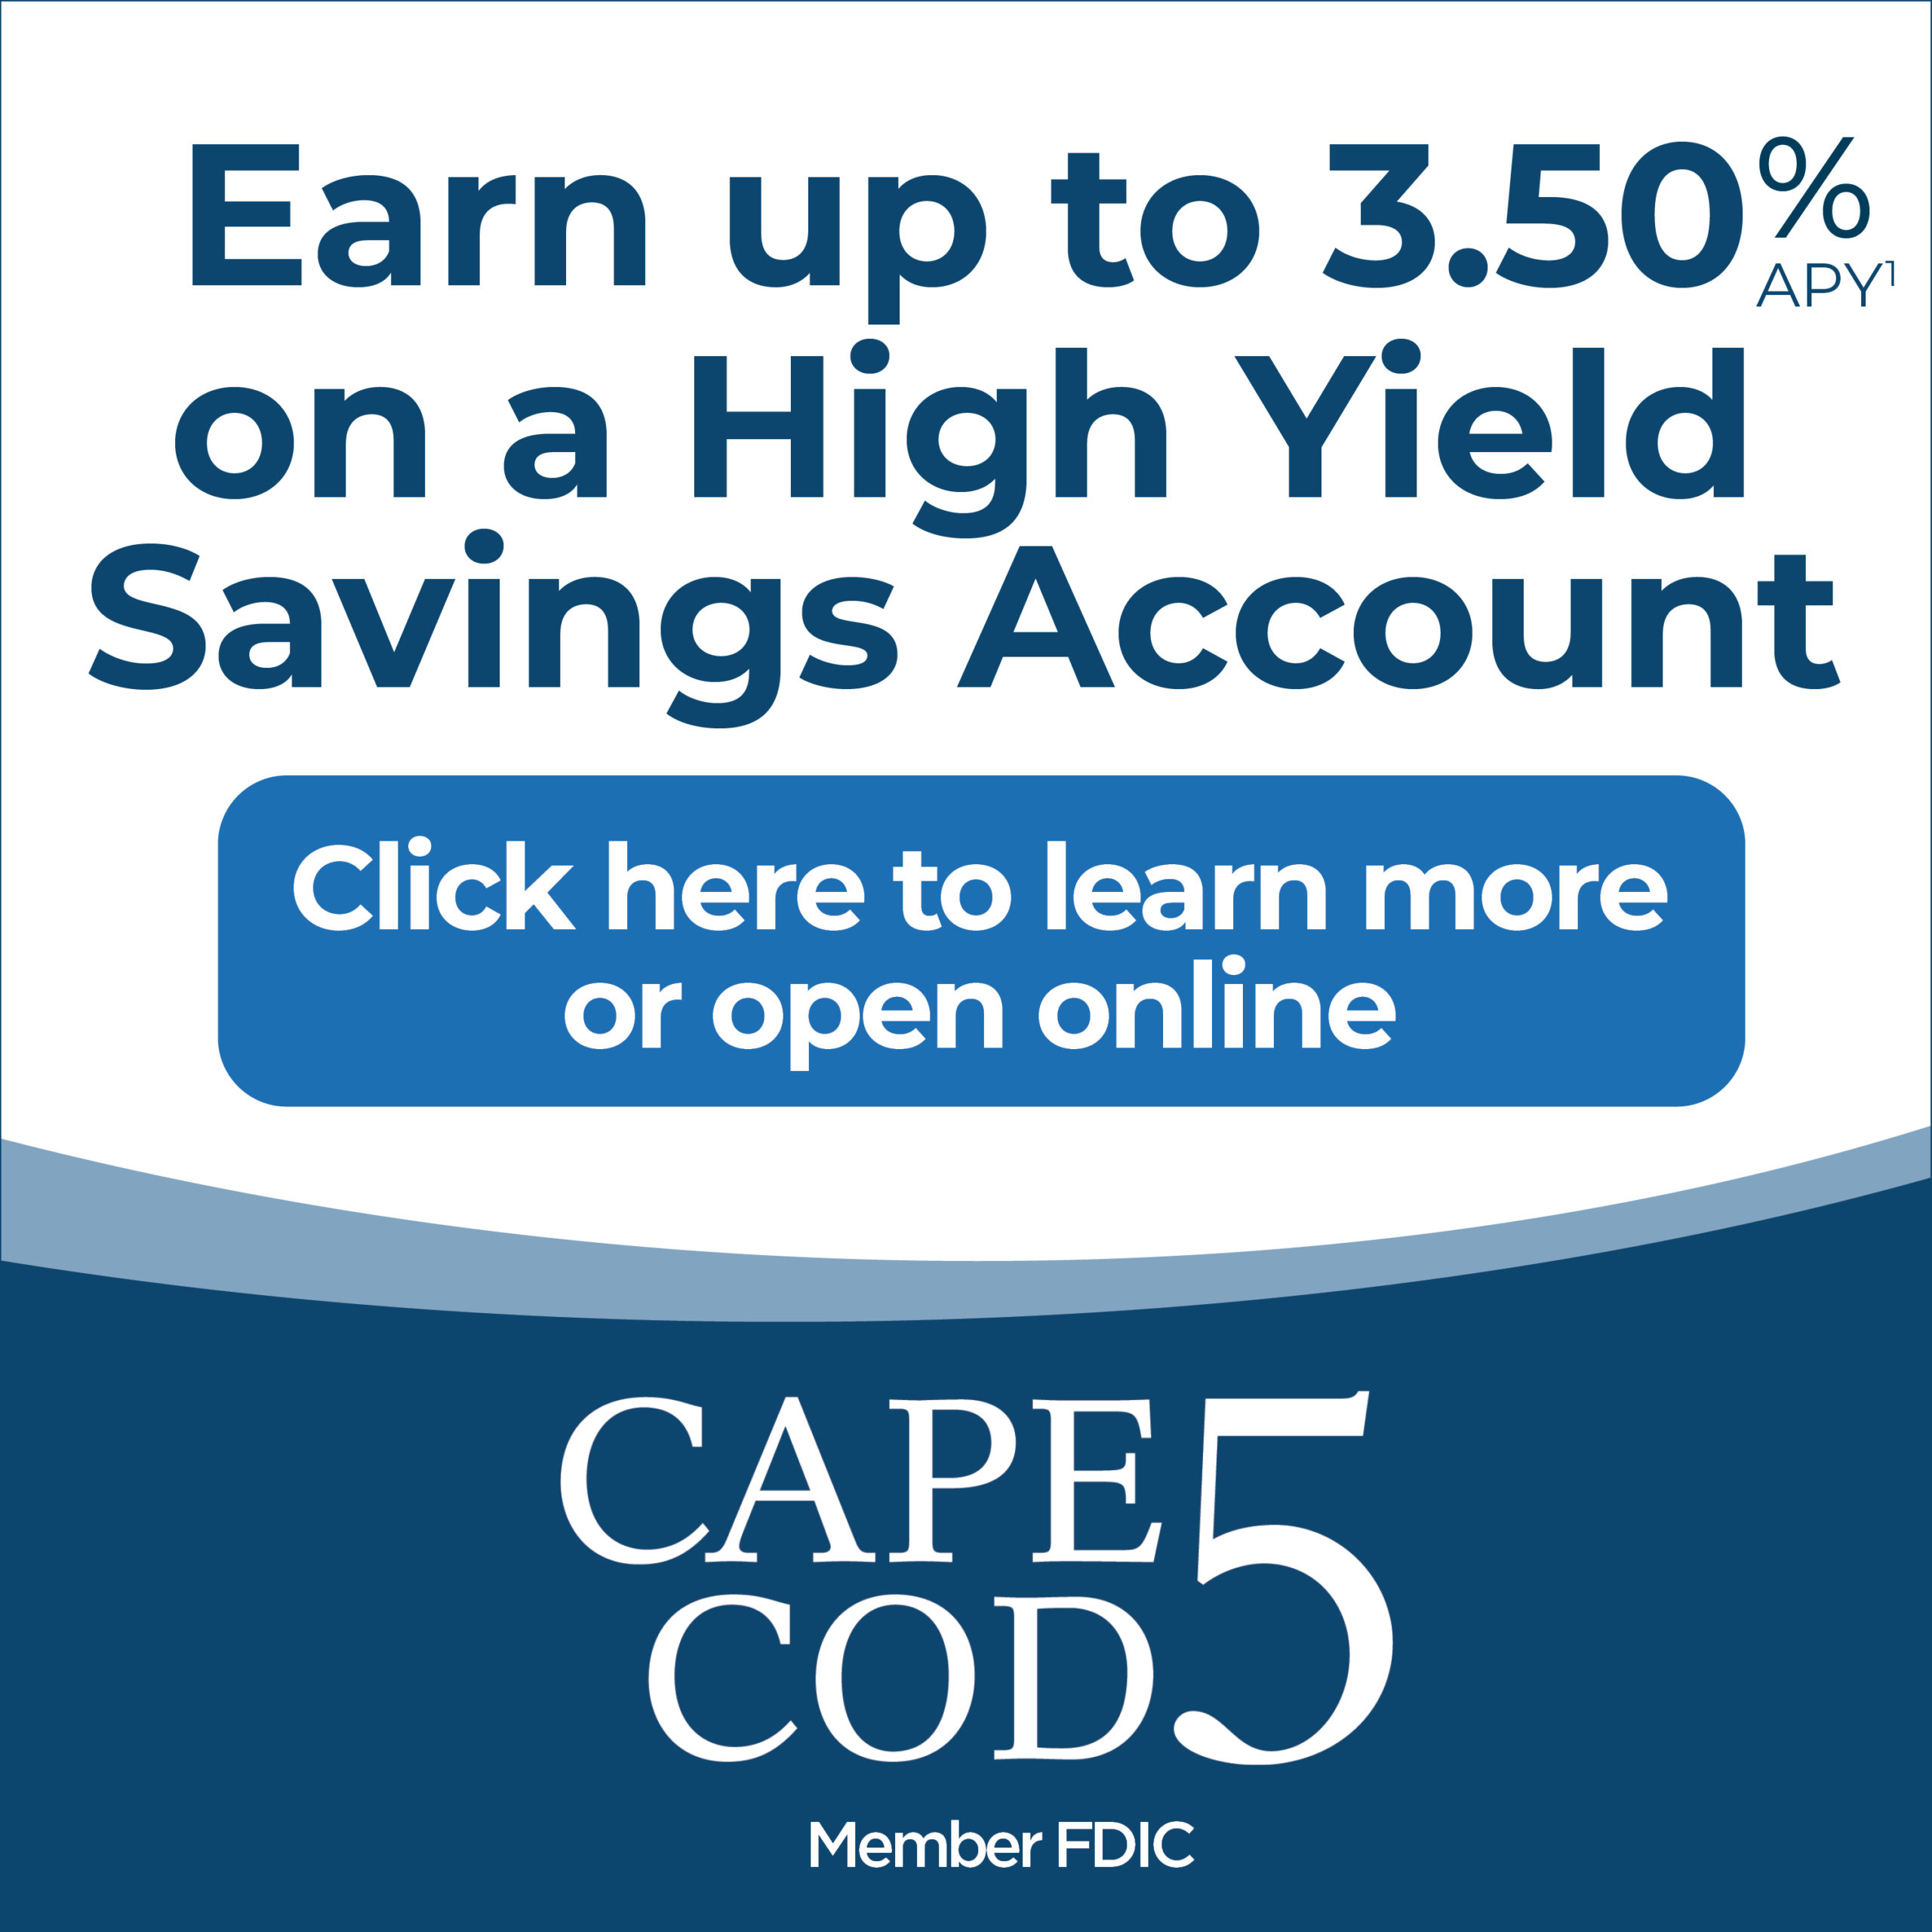 Cape Cod Five is offering High Yield Savings